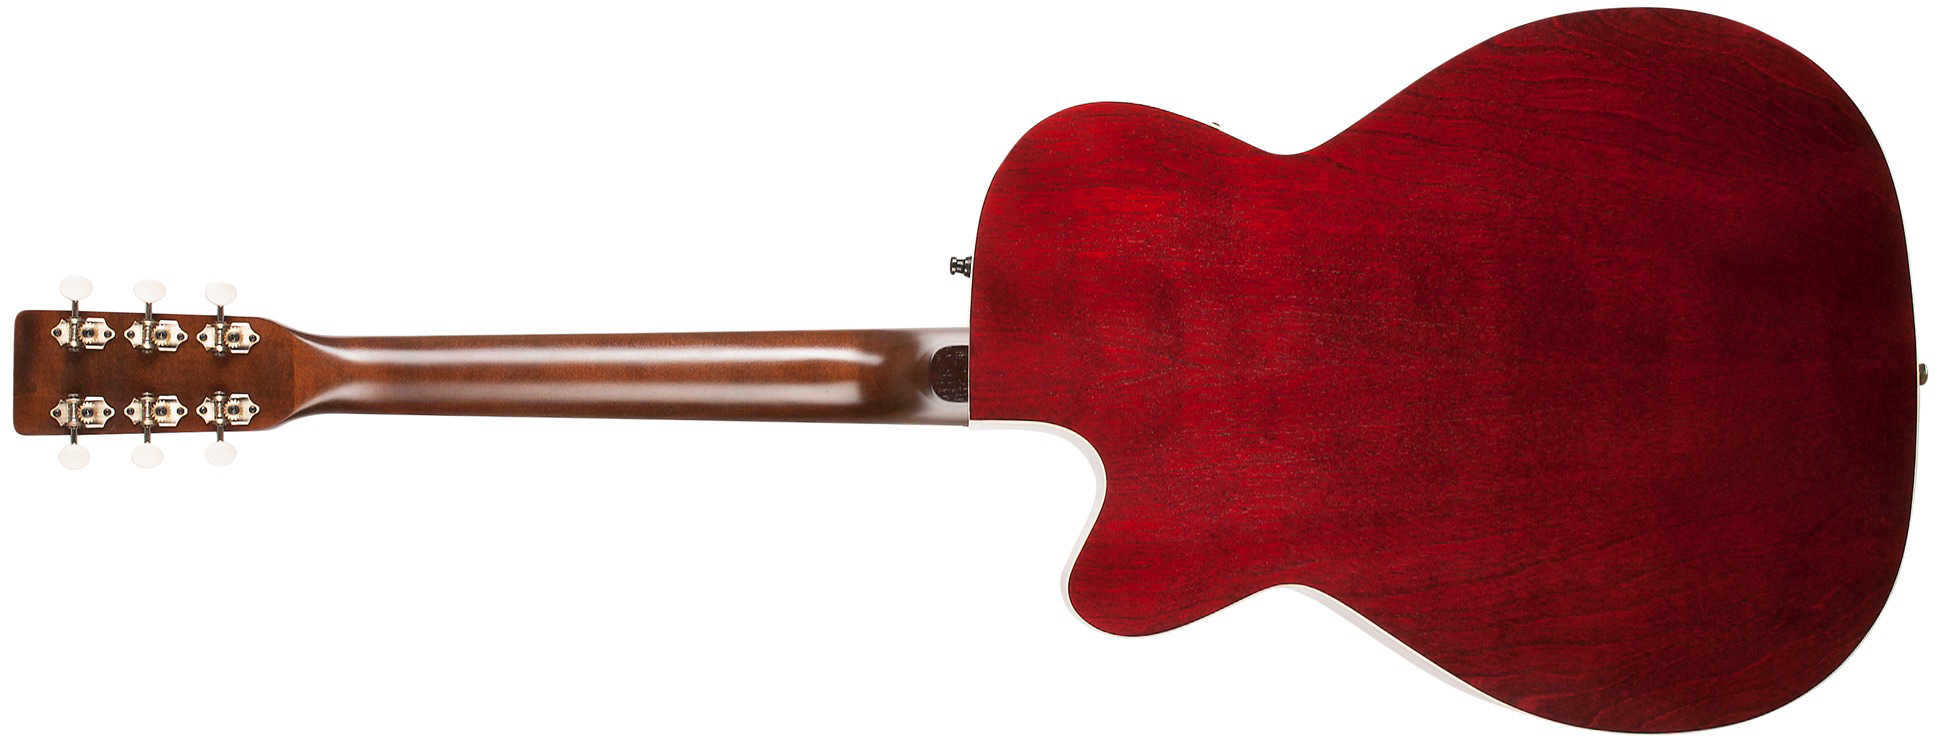 Art Et Lutherie Legacy Cw Presys Ii Concert Hall Cedre Merisier Rw - Tennessee Red - Guitare Electro Acoustique - Variation 1